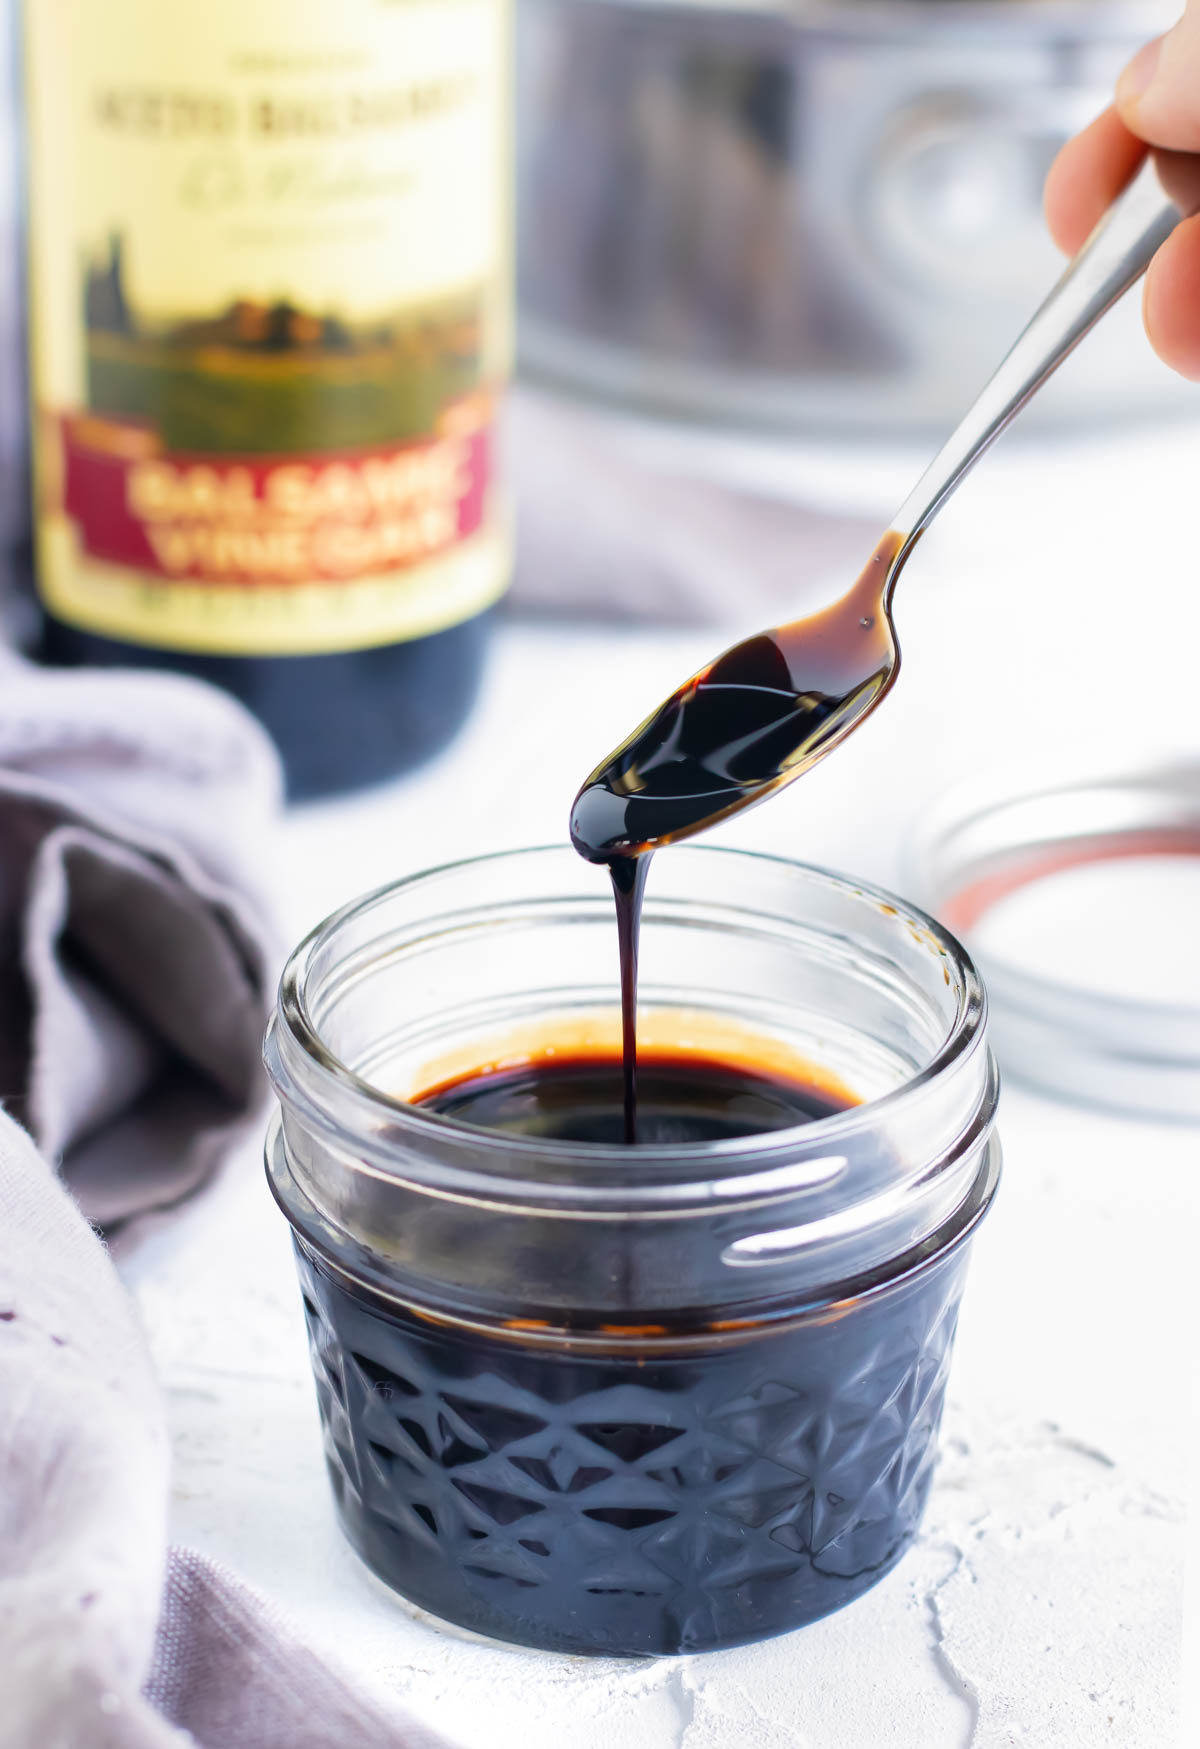 Balsamic glaze being scooped up by a spoon from a clear mason jar container.